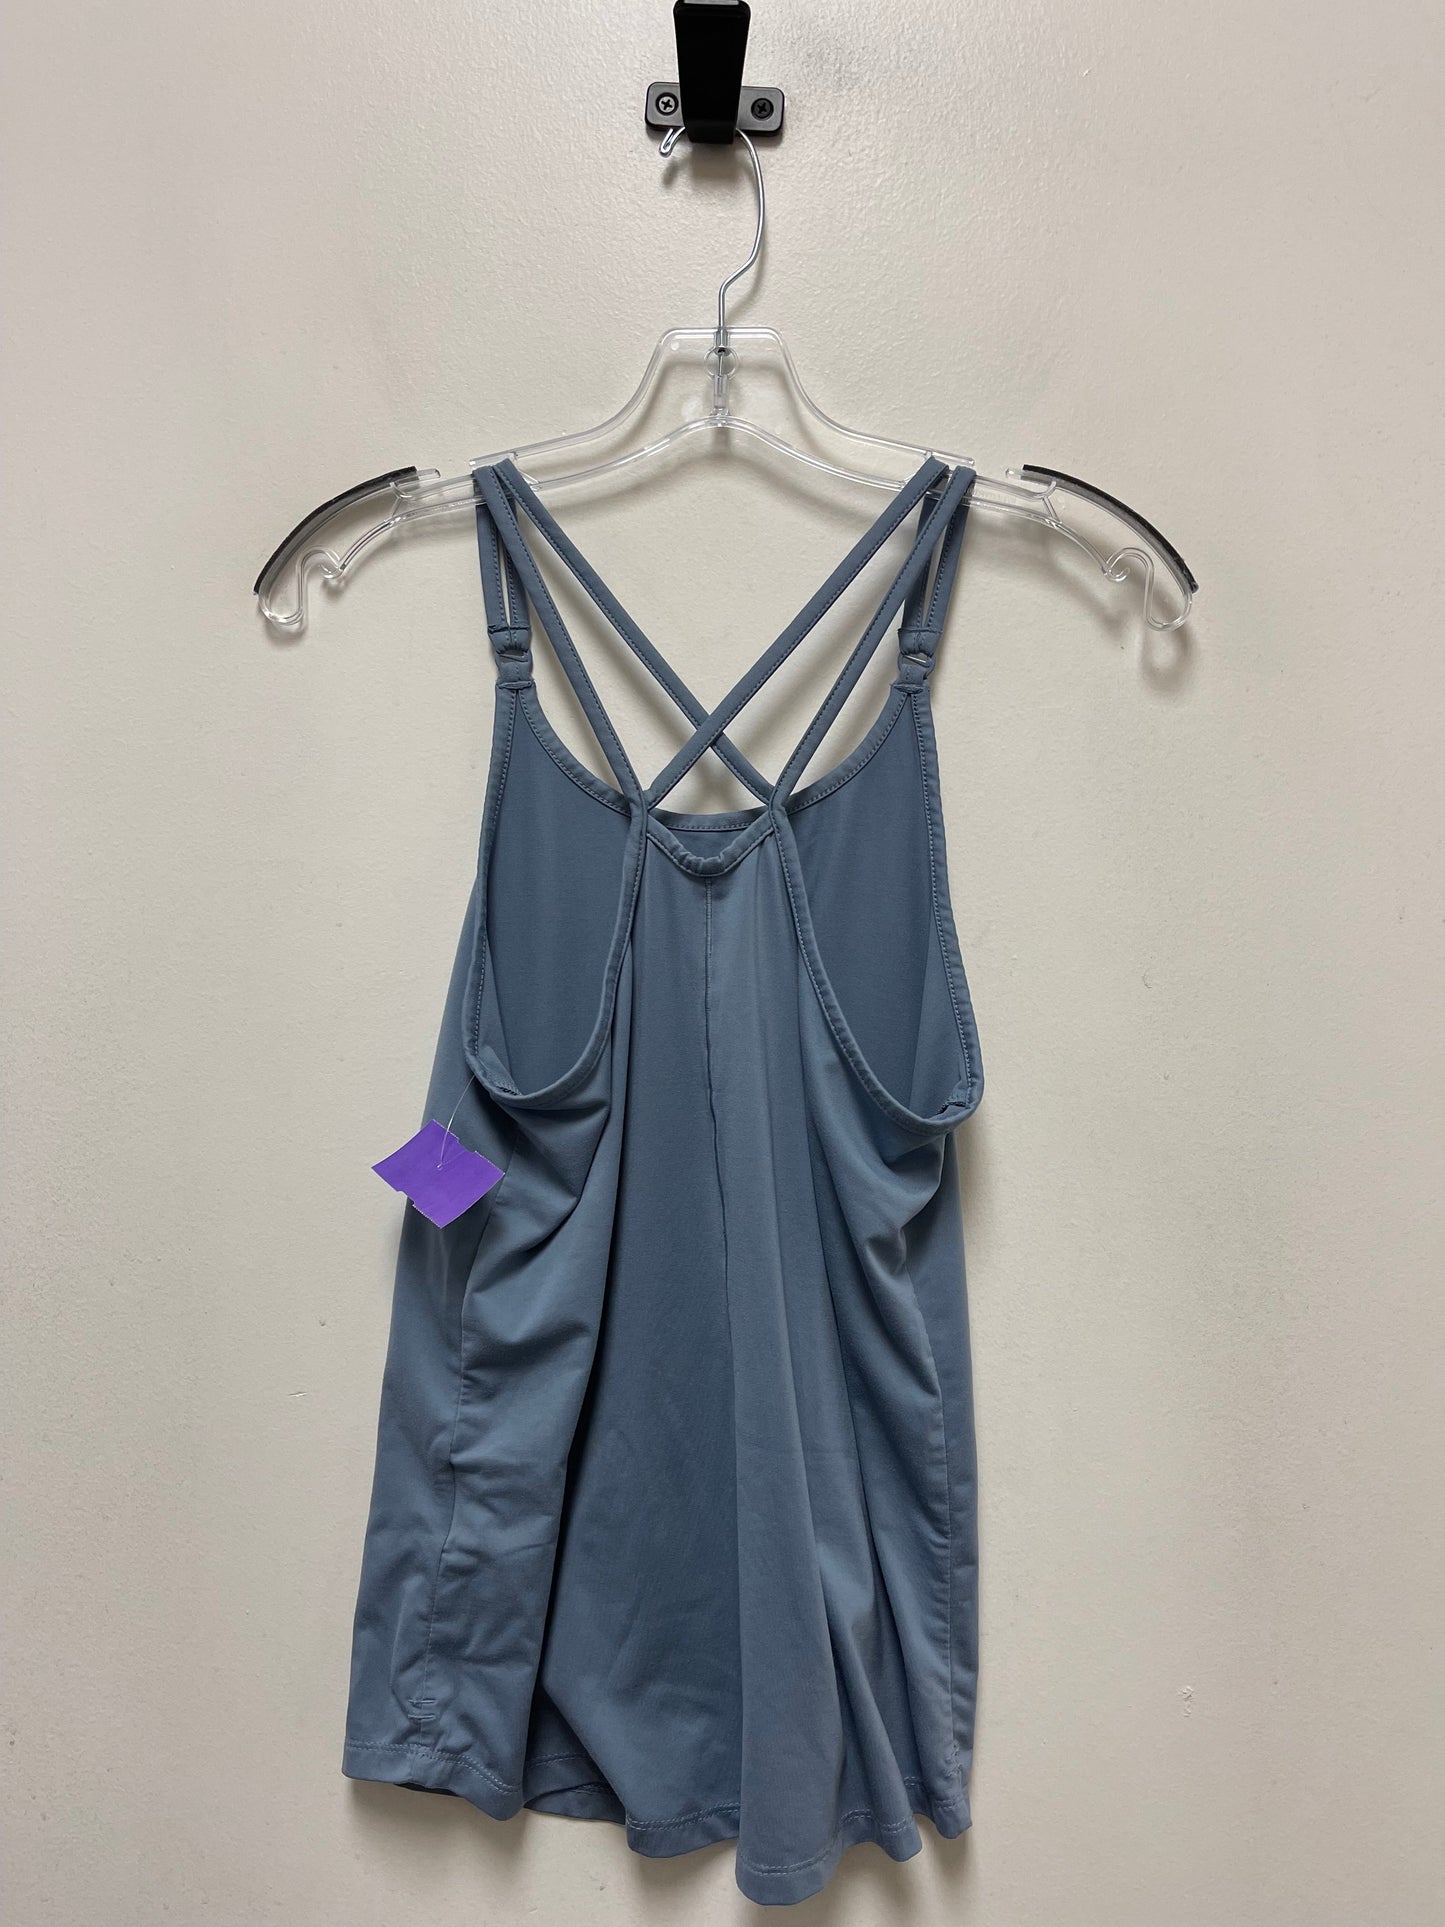 Blue Athletic Tank Top Nike Apparel, Size S